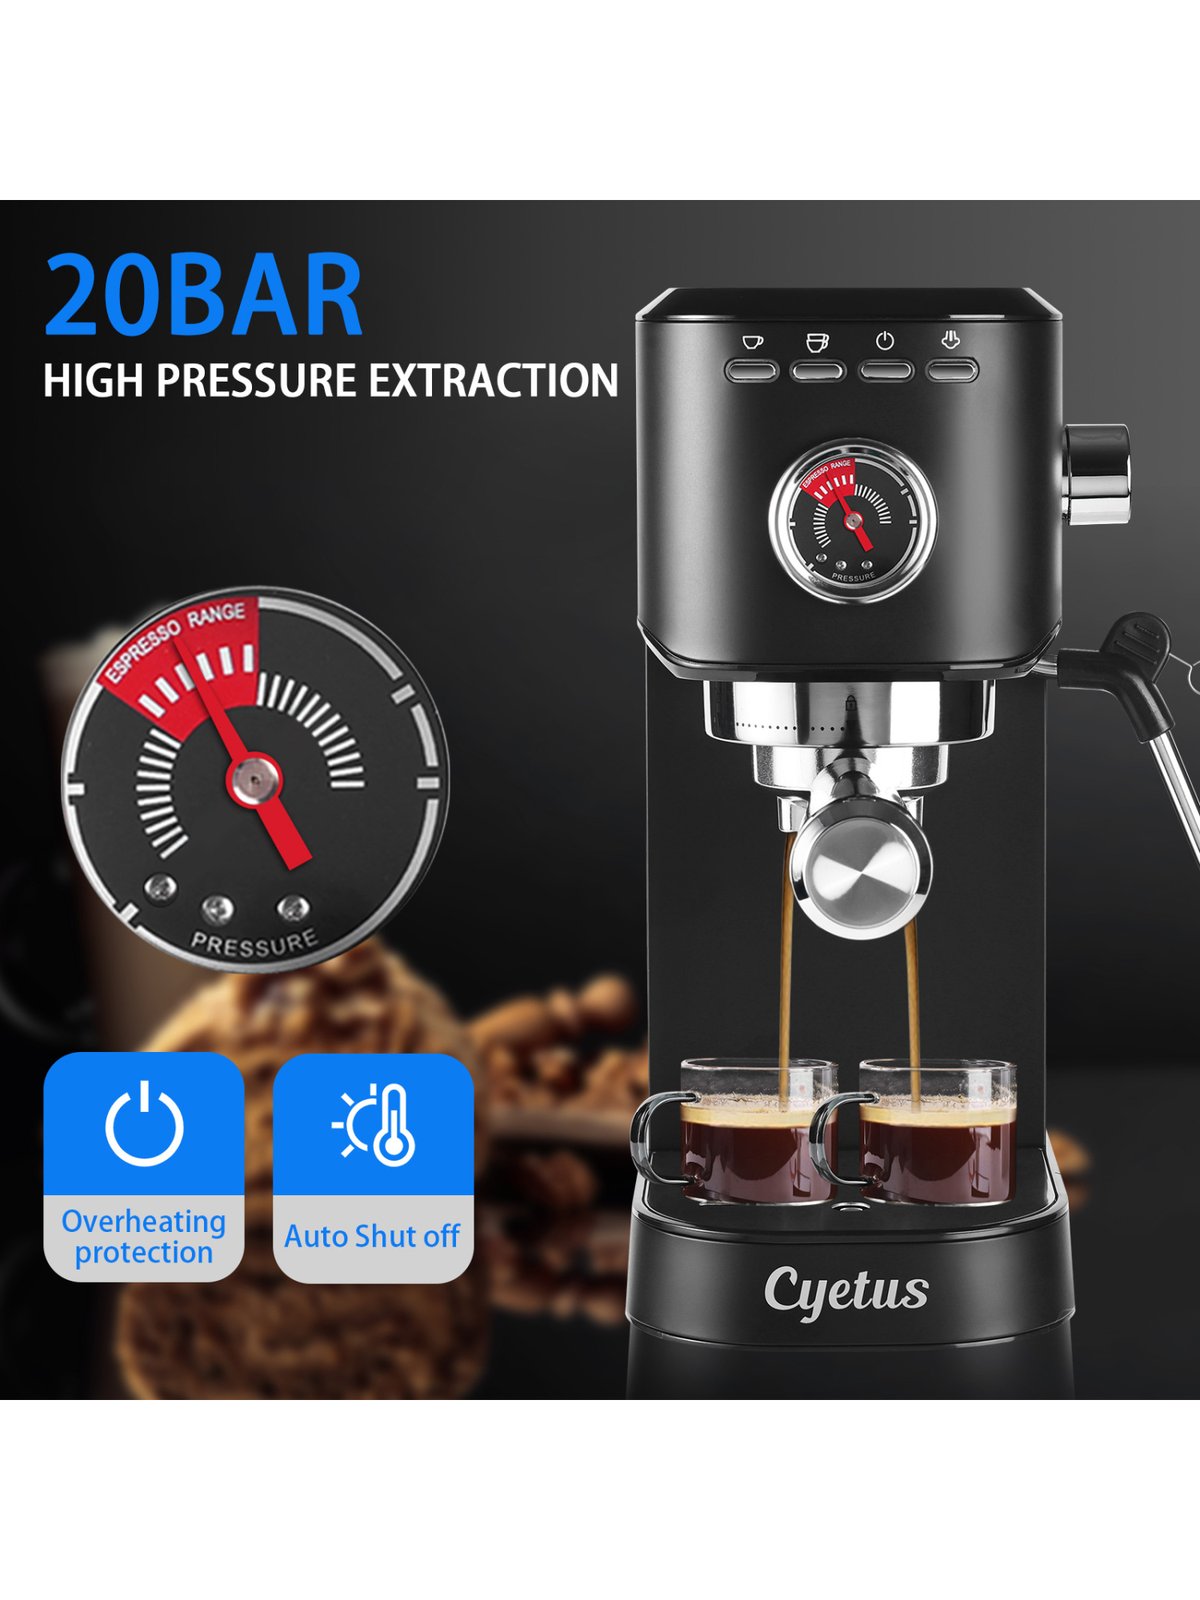 https://images.verishop.com/cyetus-black-espresso-machine-for-at-home-use-with-milk-steam-frother-wand-and-electric-coffee-bean-grinder-with-removable-stainless-steel-bowl/M00679283562651-2422687127?auto=format&cs=strip&fit=max&w=1200